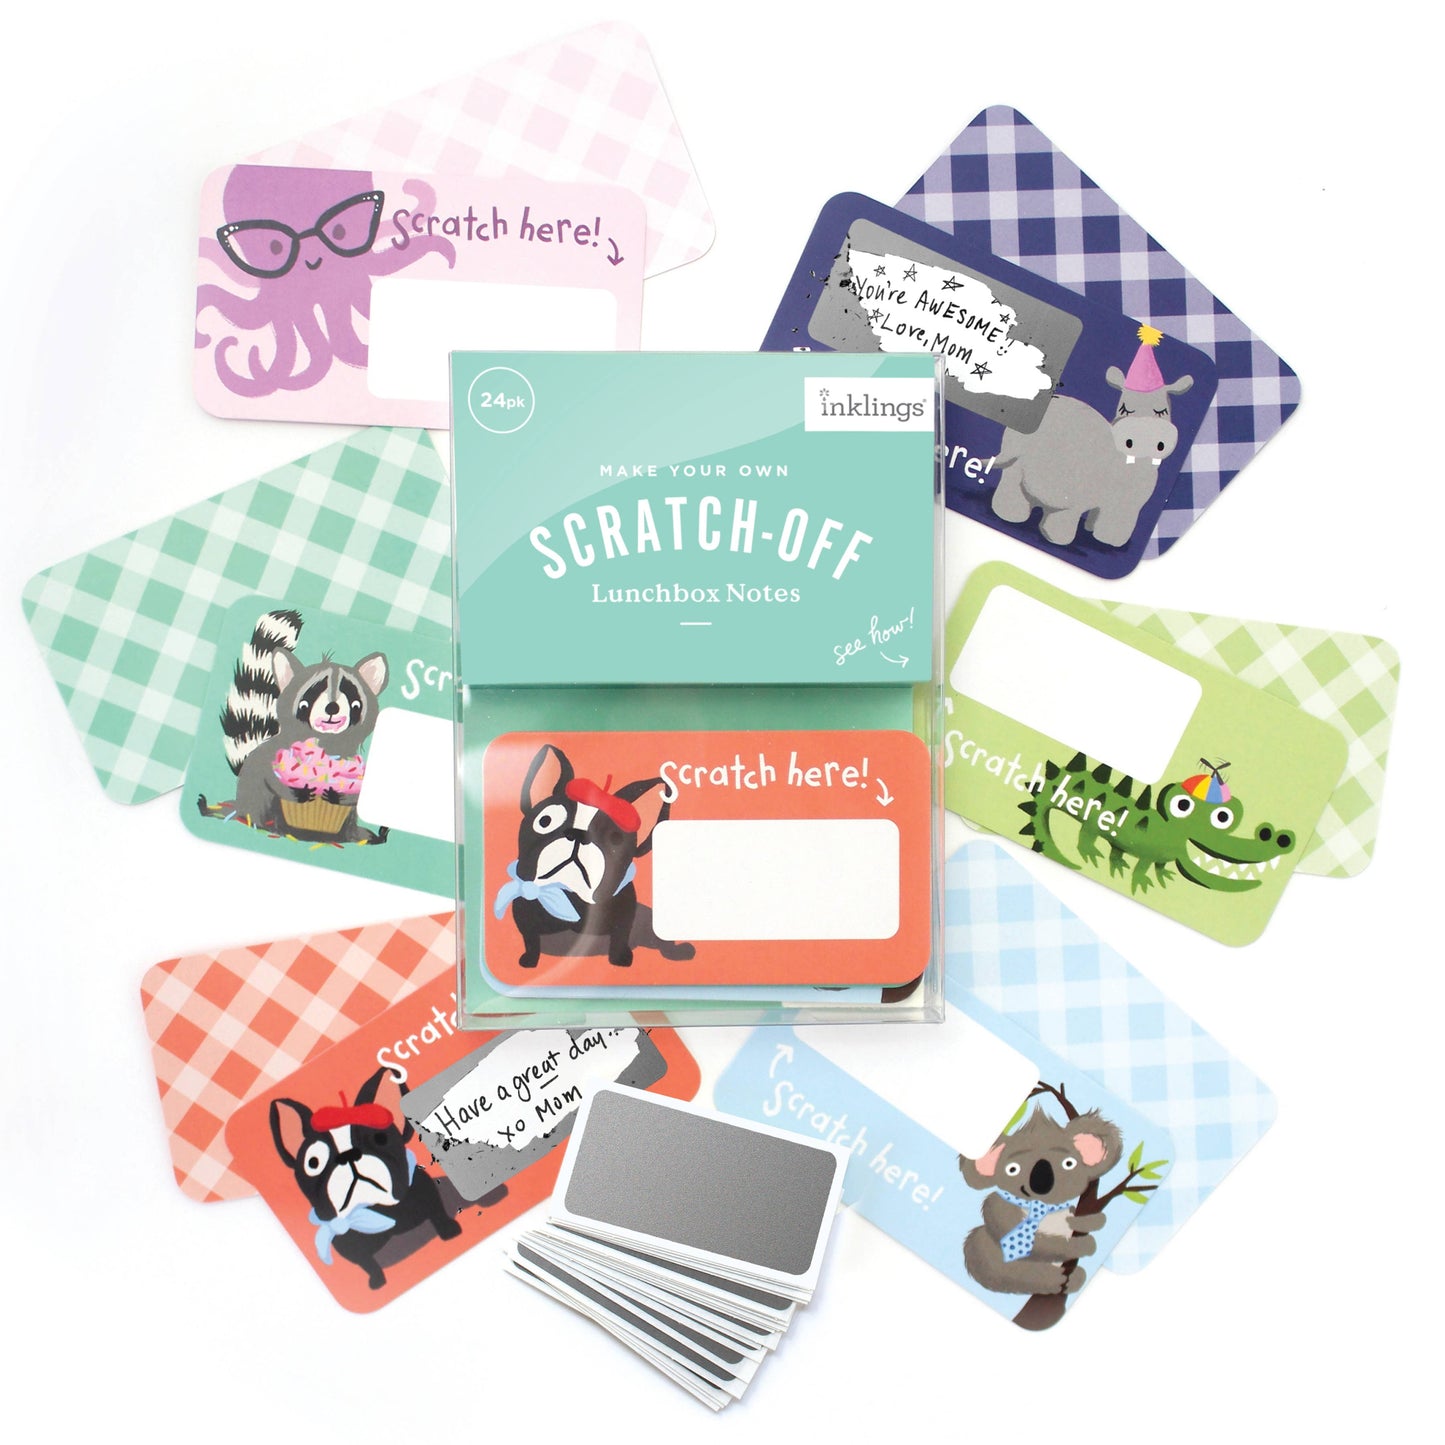 24 scratch-off lunchbox notes! Simply write your own special handwritten message in the designated area, cover it with the scratch-off sticker provided, and scratch to reveal your hidden message! These tiny notes are the perfect size to slip into a lunch bag or coat pocket of someone special. Animal Scratch off note cards